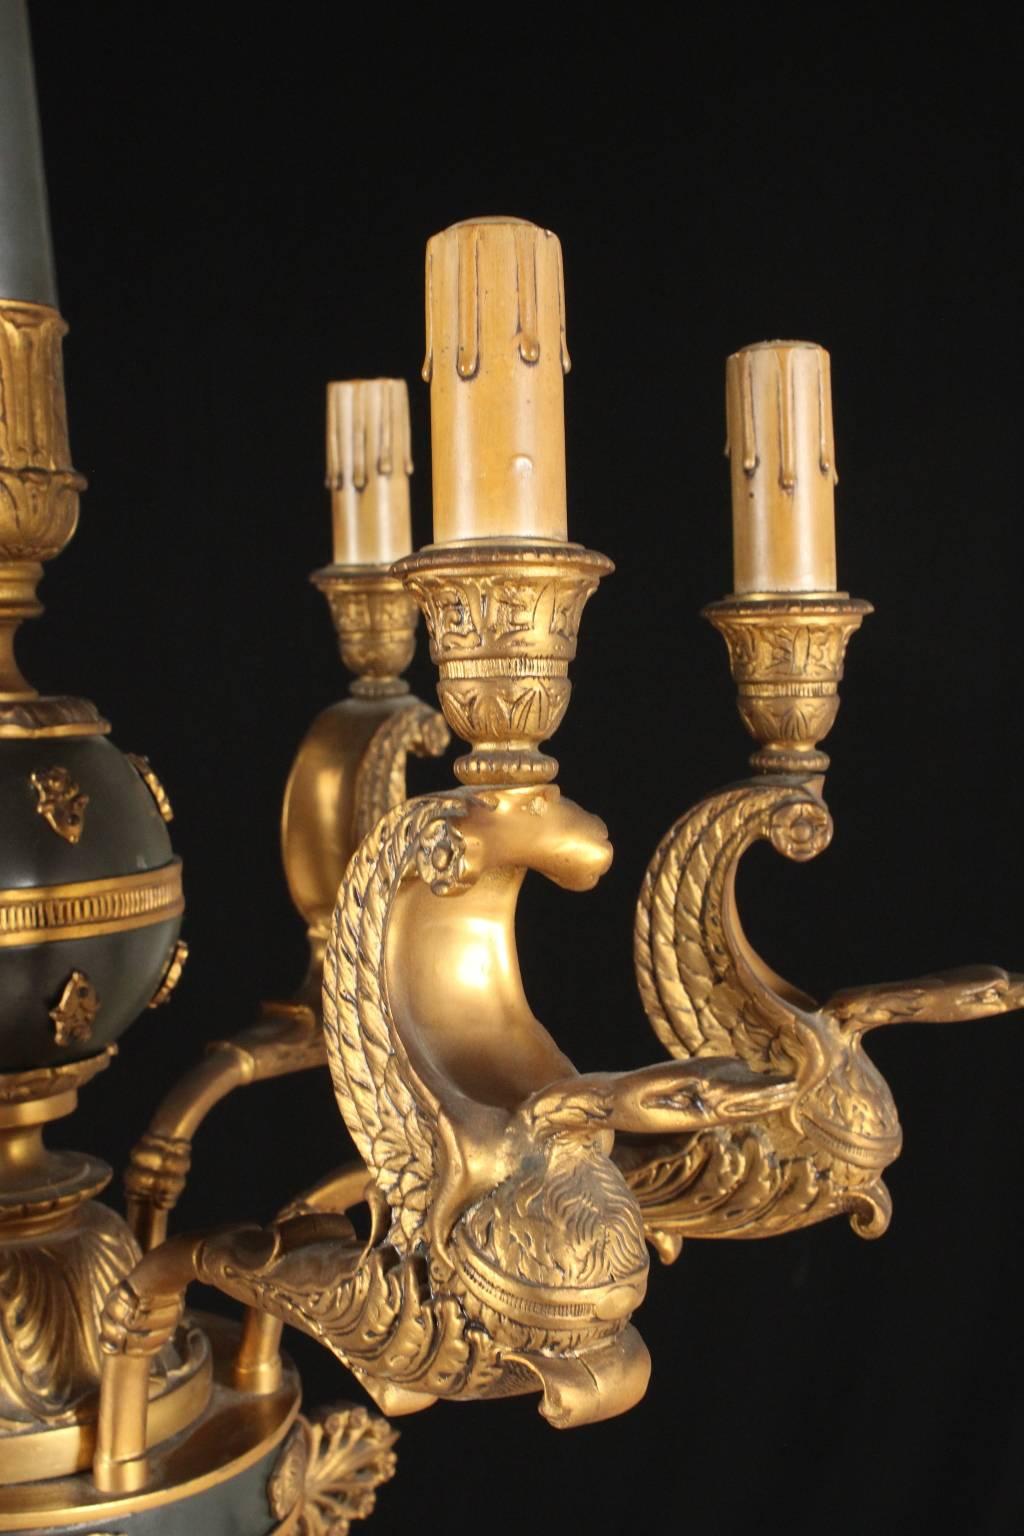 A gilded and burnished bronze chandelier with Empire design, six swan shaped arms. Manufactured in Italy in the late 19th century.